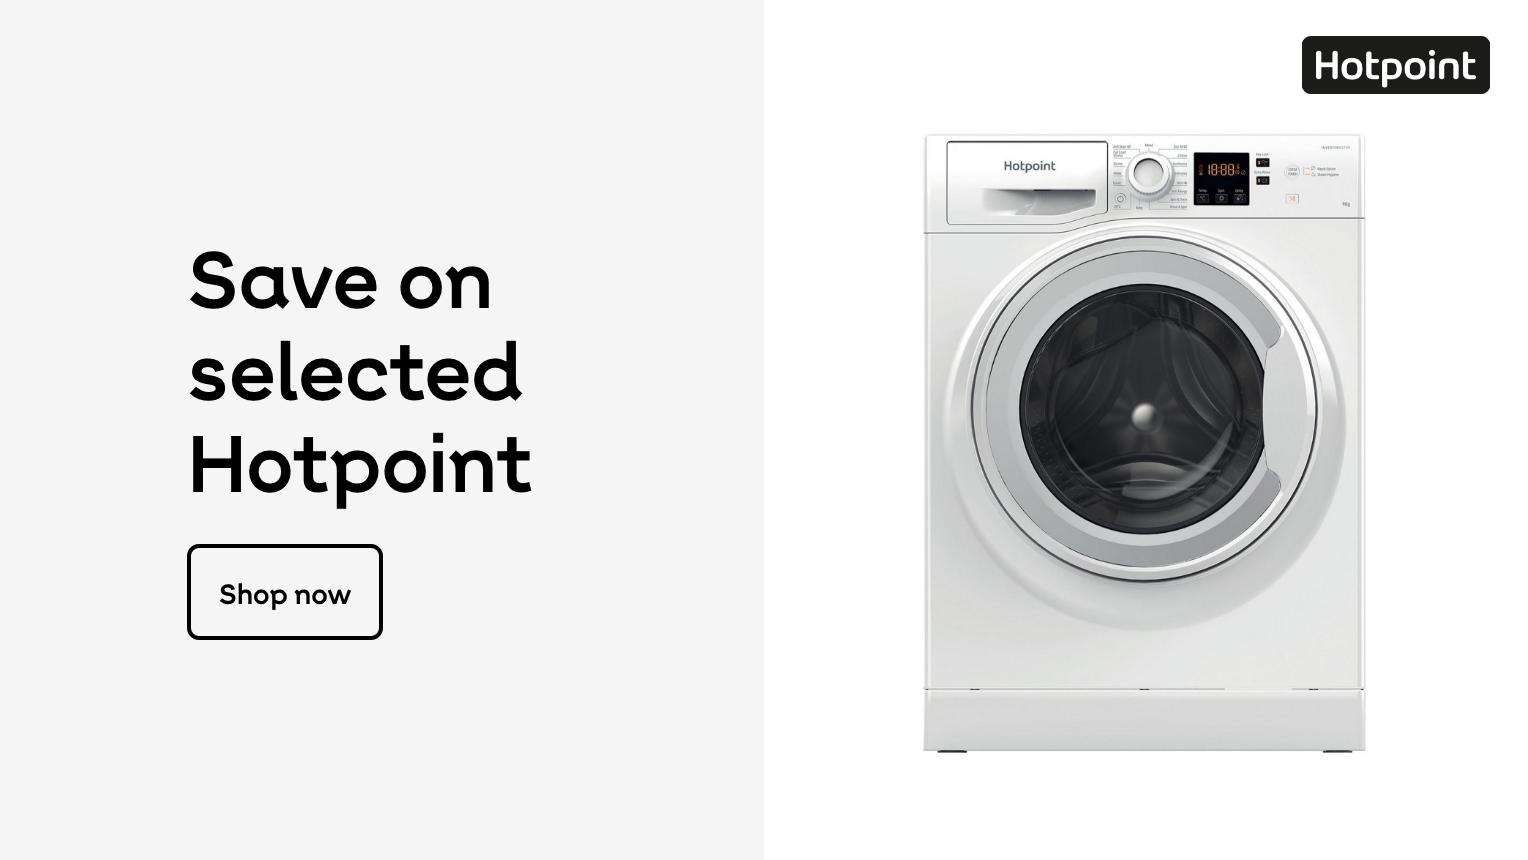 Save on selected Hotpoint. Shop now